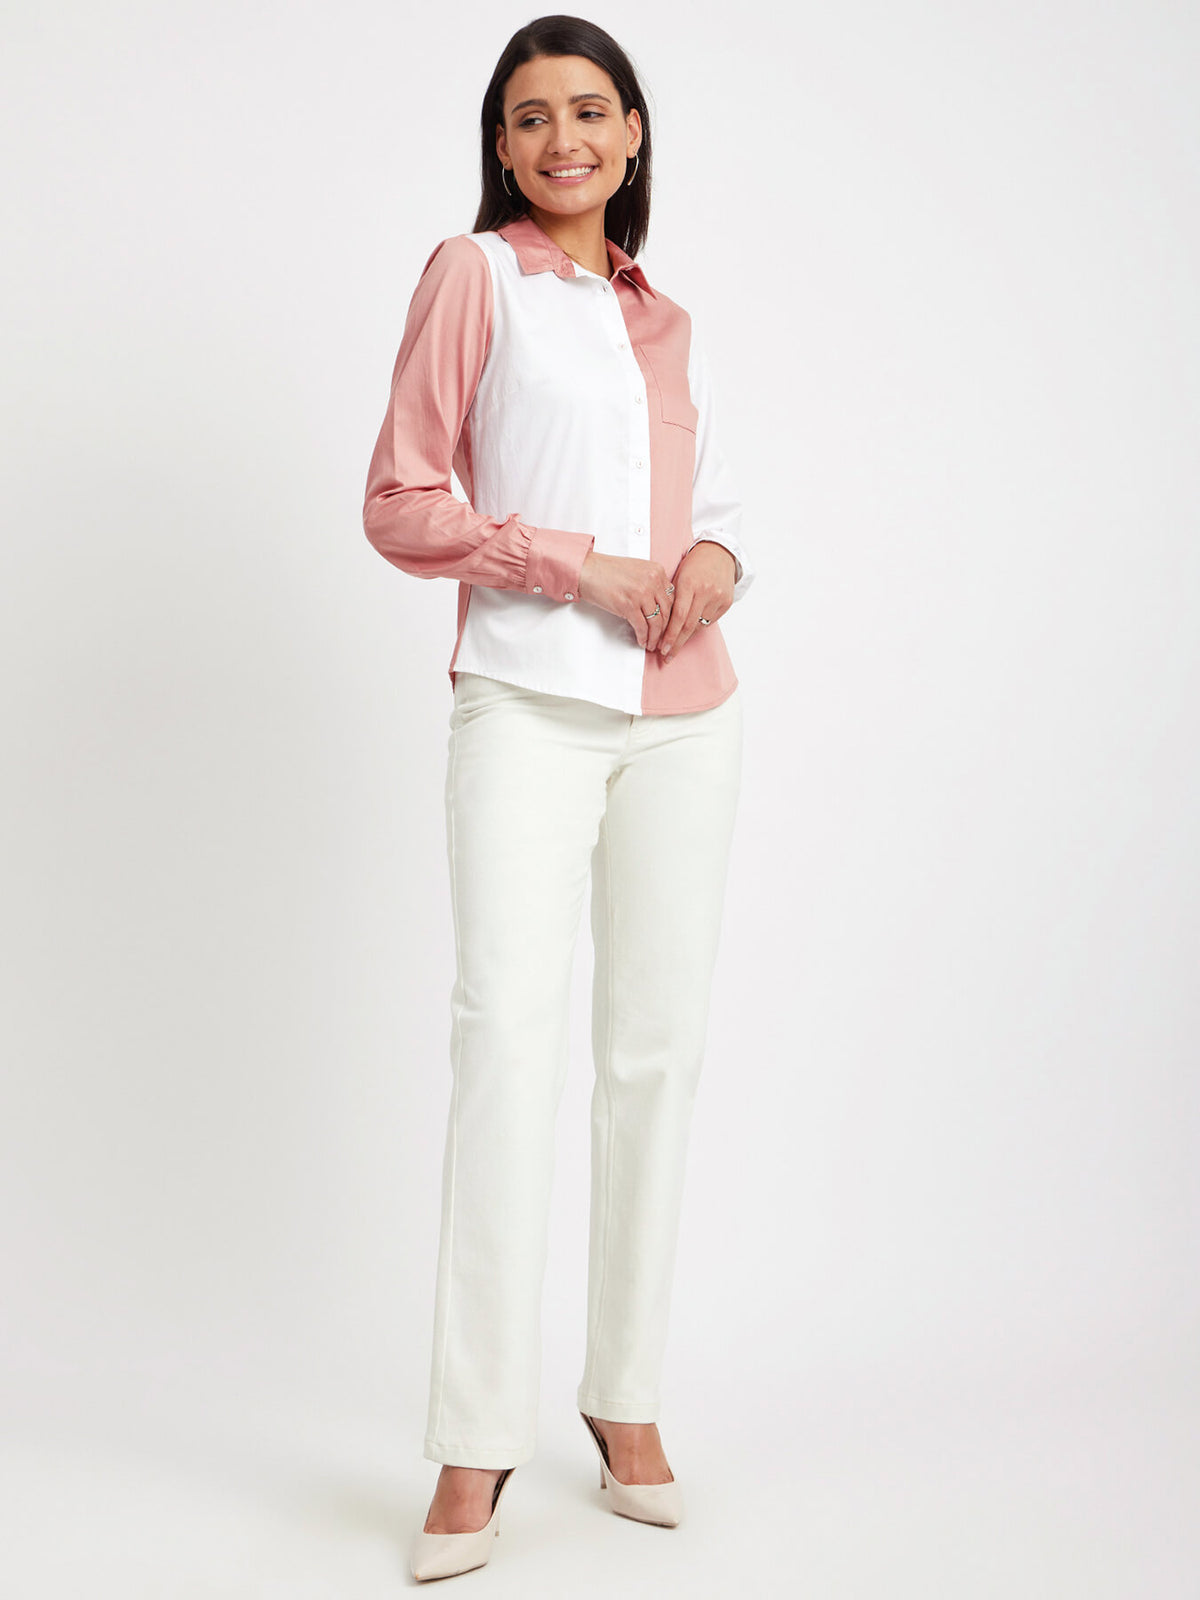 Cotton Satin Colour Block Shirt - Dusty Pink And White